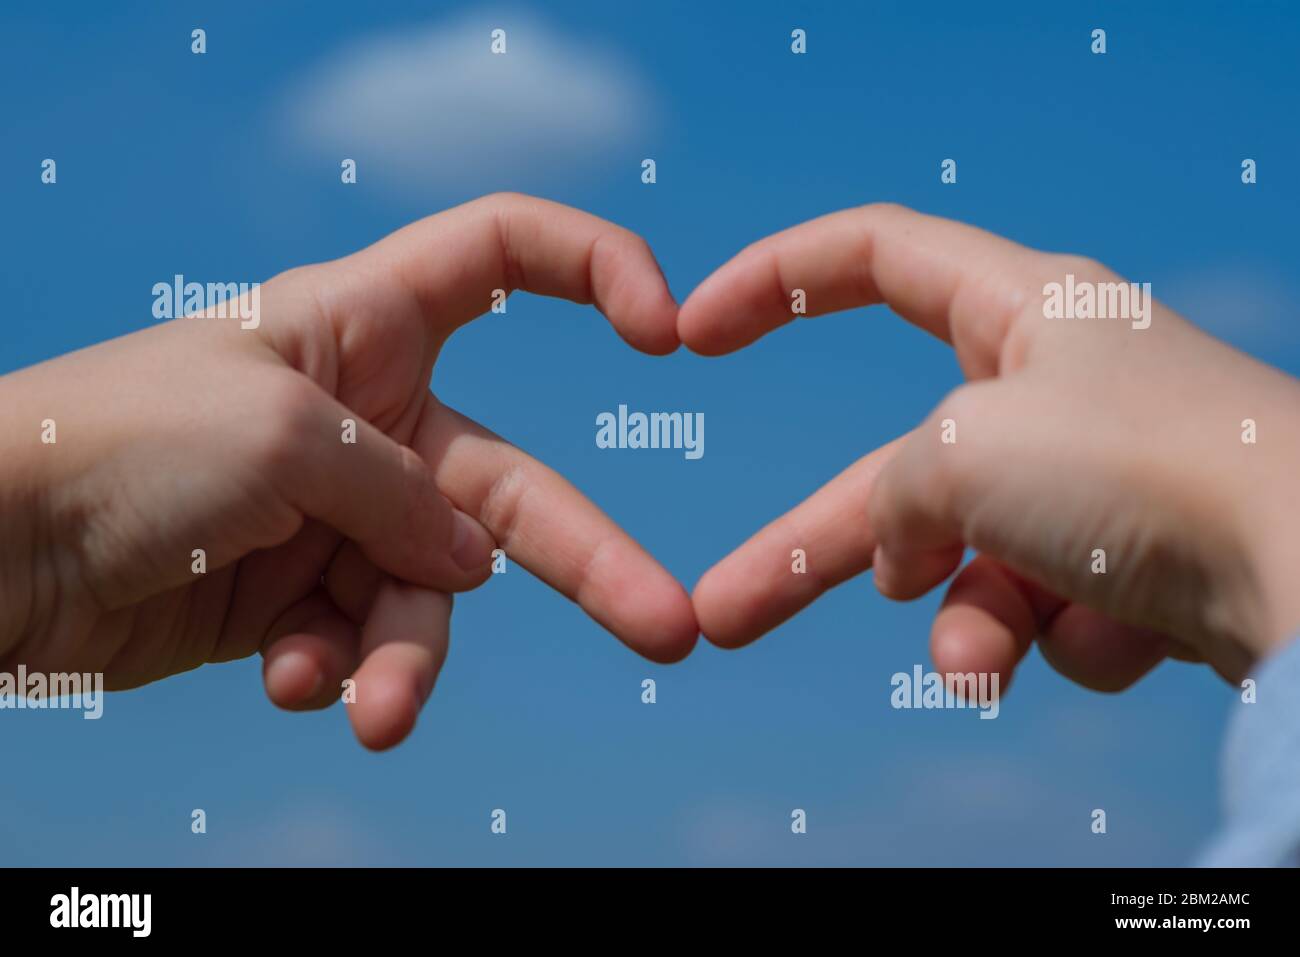 Love Concept Heart Shape Hand Gesture Little Girl Made A Heart With Her Fingers Against The Blue Sky Stock Photo Alamy